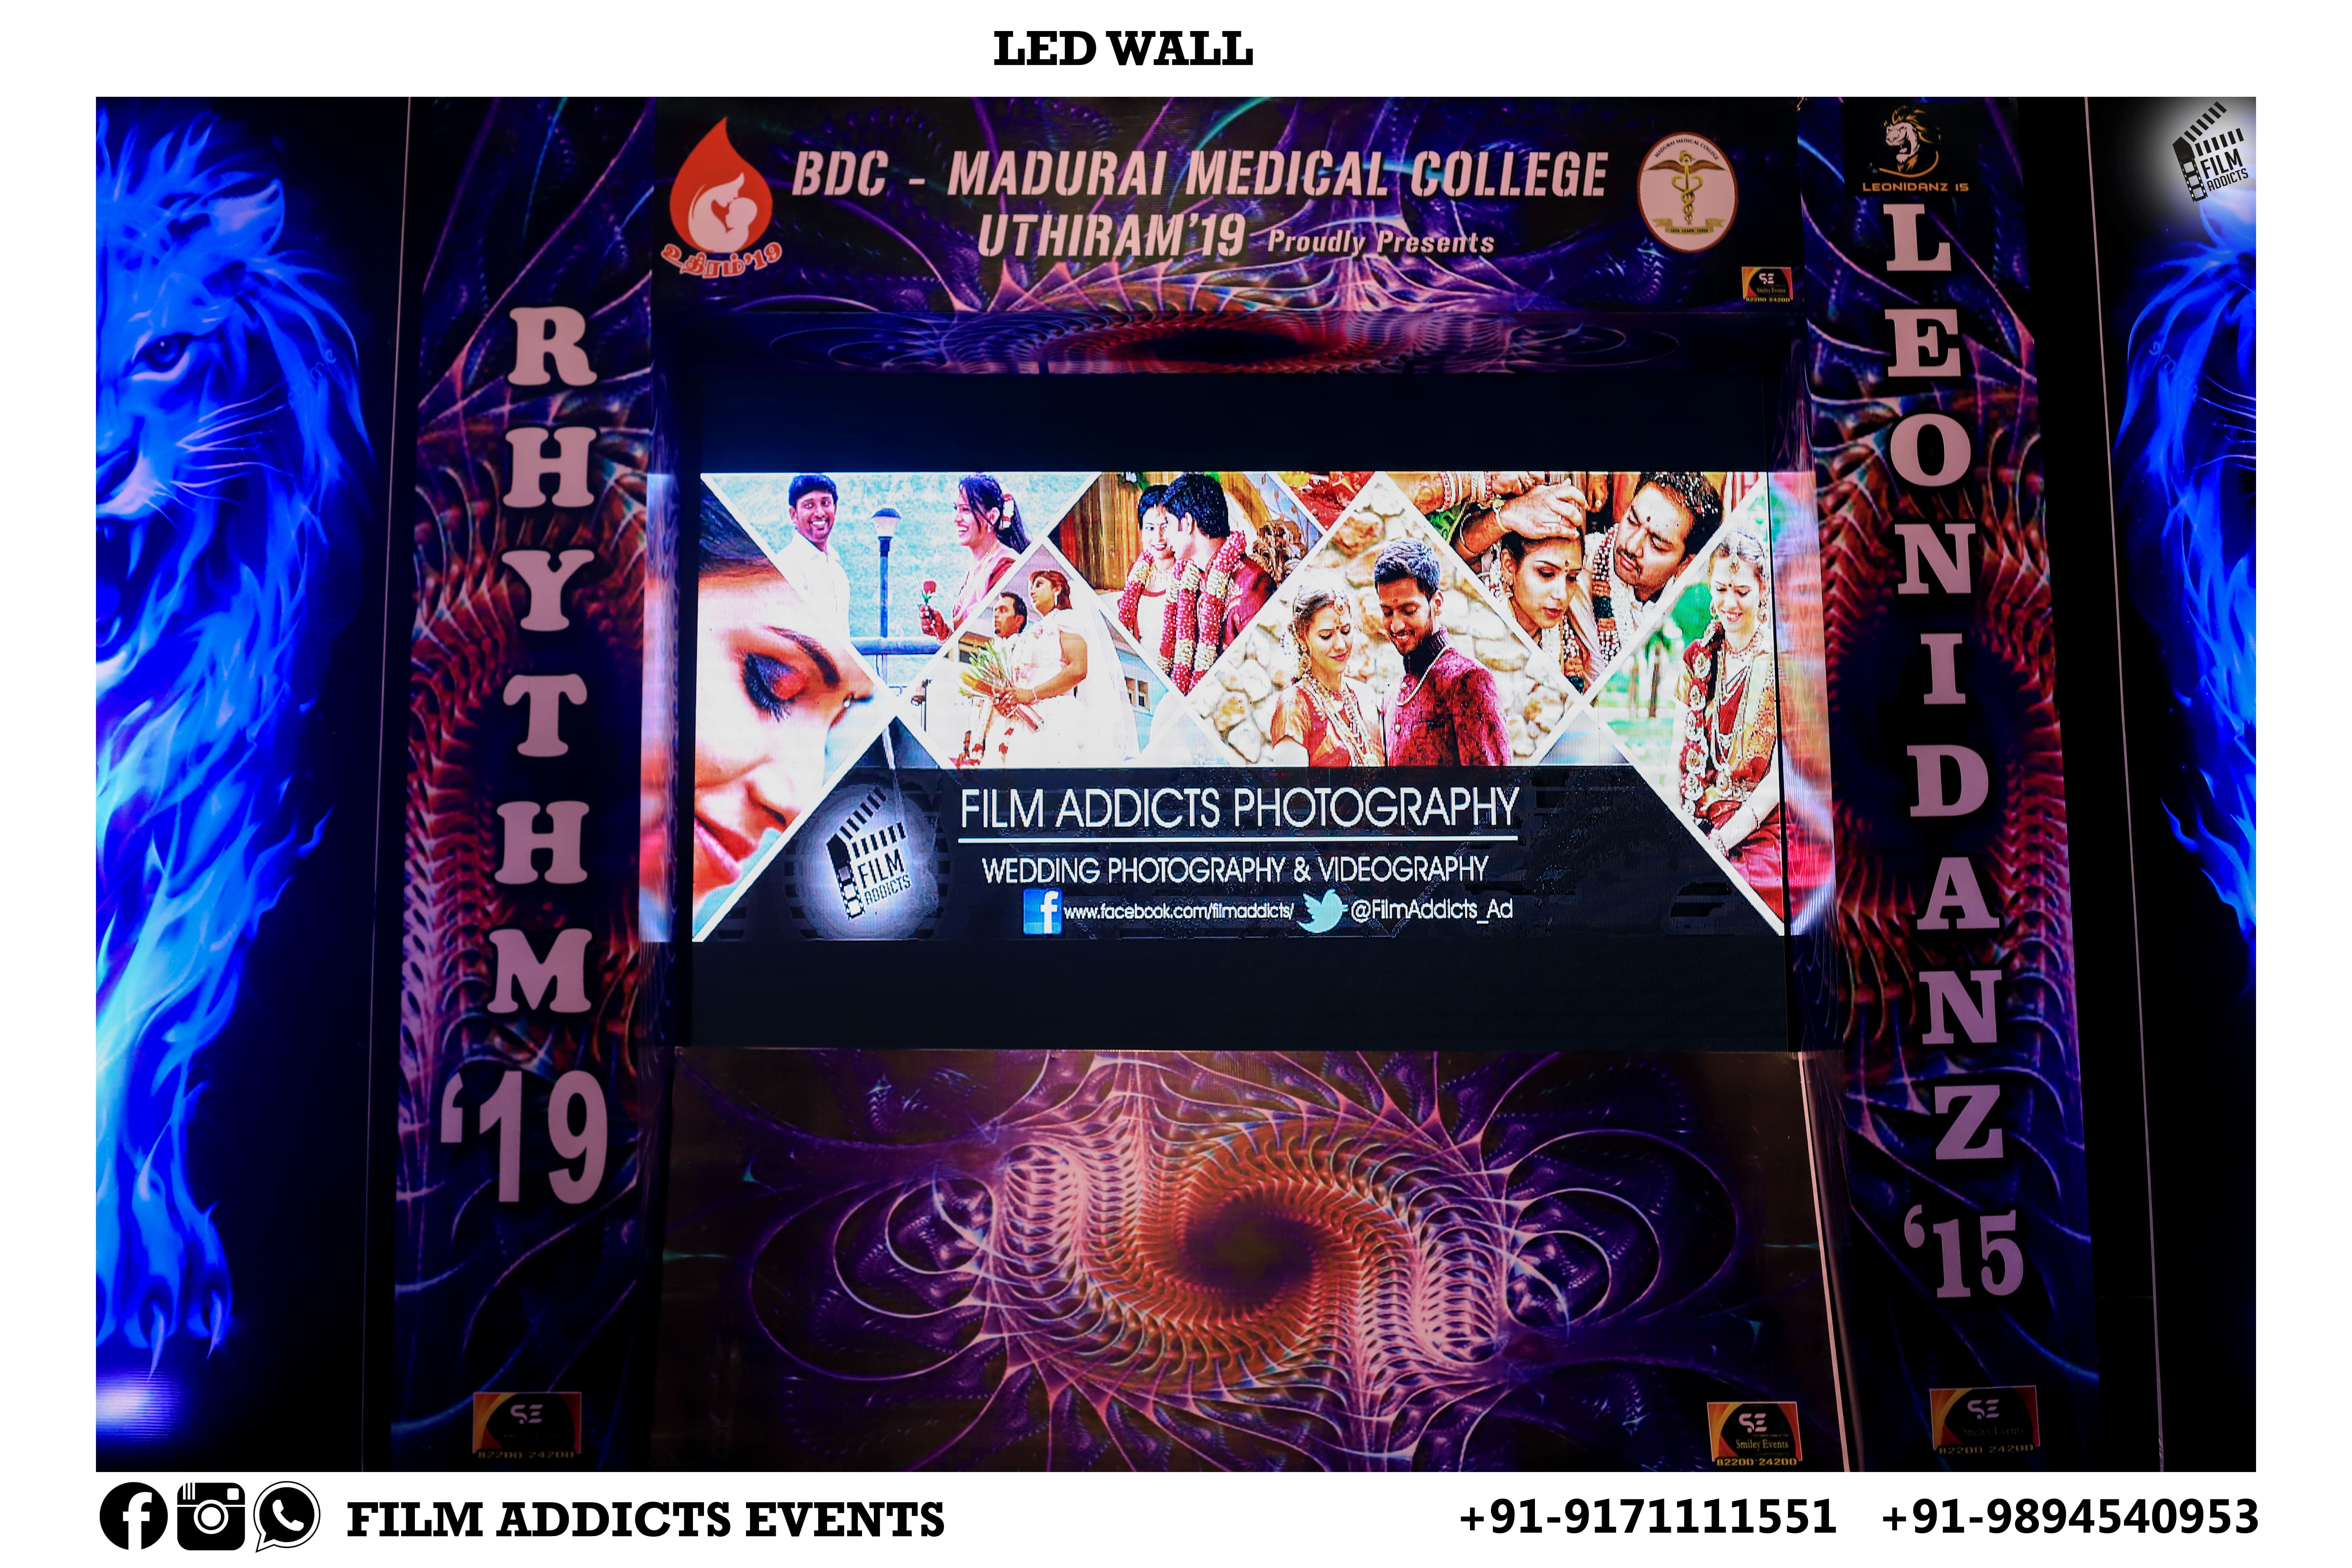 Best LED Video Wall Services in Sivagangai, Best LED Wall Services In Sivagangai ,Best LED Wall Rental Services In Sivagangai, Best Budget LED Wall Rental  Services in Sivagangai, Best Wedding LED Wall Rentals In Sivagangai, Best clarity in led wall rentals in Sivagangai, Best cost-effective display rentals in Sivagangai, Best crisp, bright, high resolution led video services in Sivagangai, Best led wall rental services in Sivagangai, Best tailored lighting, vision and sound solutions led rentals in Sivagangai, Best outstanding new LED panels rental Service in Sivagangai, Best Indoor and Outdoor LED panels rental Service in Sivagangai, Best high resolution LED display rental Service in Sivagangai, Best Wedding LED wall rentals in Sivagangai, Best Grand wedding LED wall rentals in Sivagangai, Best LED wall rental Service in Sivagangai, Best LED Video Services in Sivagangai, Best Grand Wedding LED wall Renatls in Sivagangai, Best LED wall Rentals for Grand Occasions in Sivagangai, Best Wedding LED Video Services in Sivagangai, Best Wedding LED video wall Rental Services in Sivagangai, Best LED Video Wall Rentals for Grand Occassions in Sivagangai, Best LED Video Wall Rentals for events in Sivagangai, Best LED video Services for live events in Sivagangai, Best video wall rentals for Live events in Sivagangai, Best LED Video Wall Rentals for Live events in Sivagangai, Best LED Video Wall On Hire in Sivagangai, Best LED Video Wall Services in Sivagangai, Best LED Video Wall Service Systems in Sivagangai, Best LED Wall Washer Light Services in Sivagangai, Best LED Wall Light Services in Sivagangai, Best LED Wall Mount Bracket Services in Sivagangai.